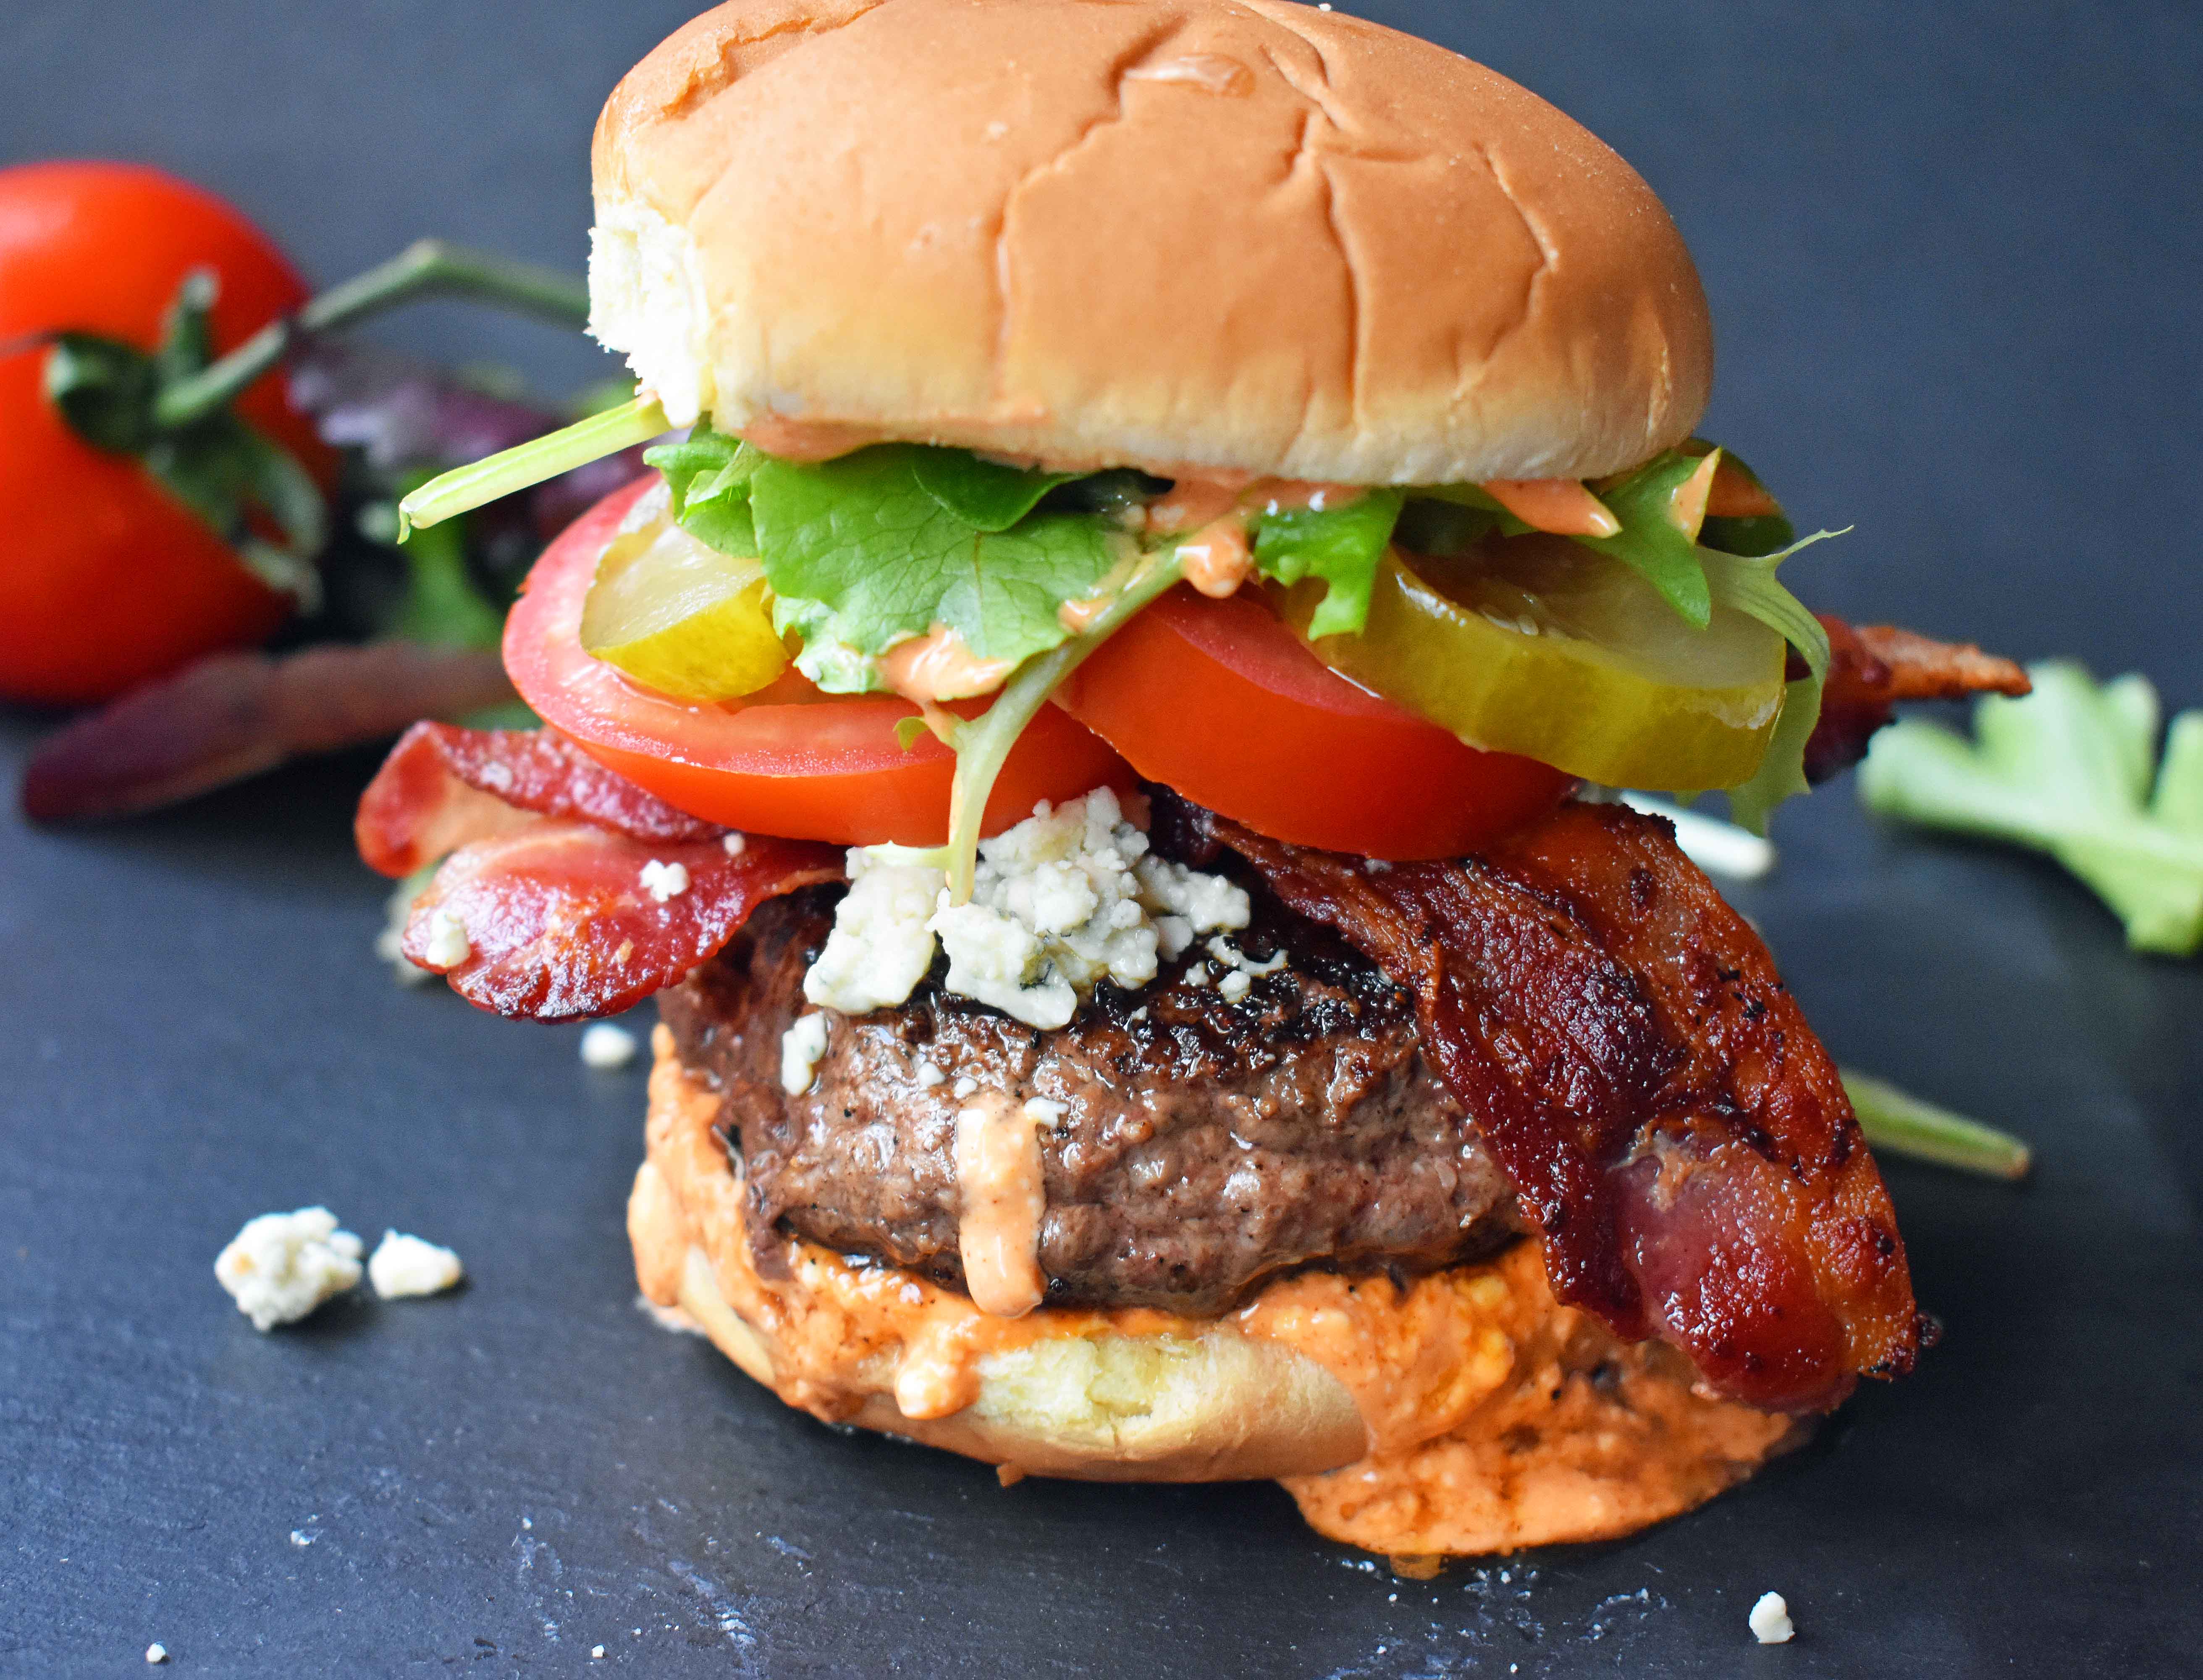 Dragonslayer Burger. Beef with blue cheese, crispy bacon, juicy tomatoes, crunchy pickles, spring mix, and buffalo ranch sauce. www.modernhoney.com